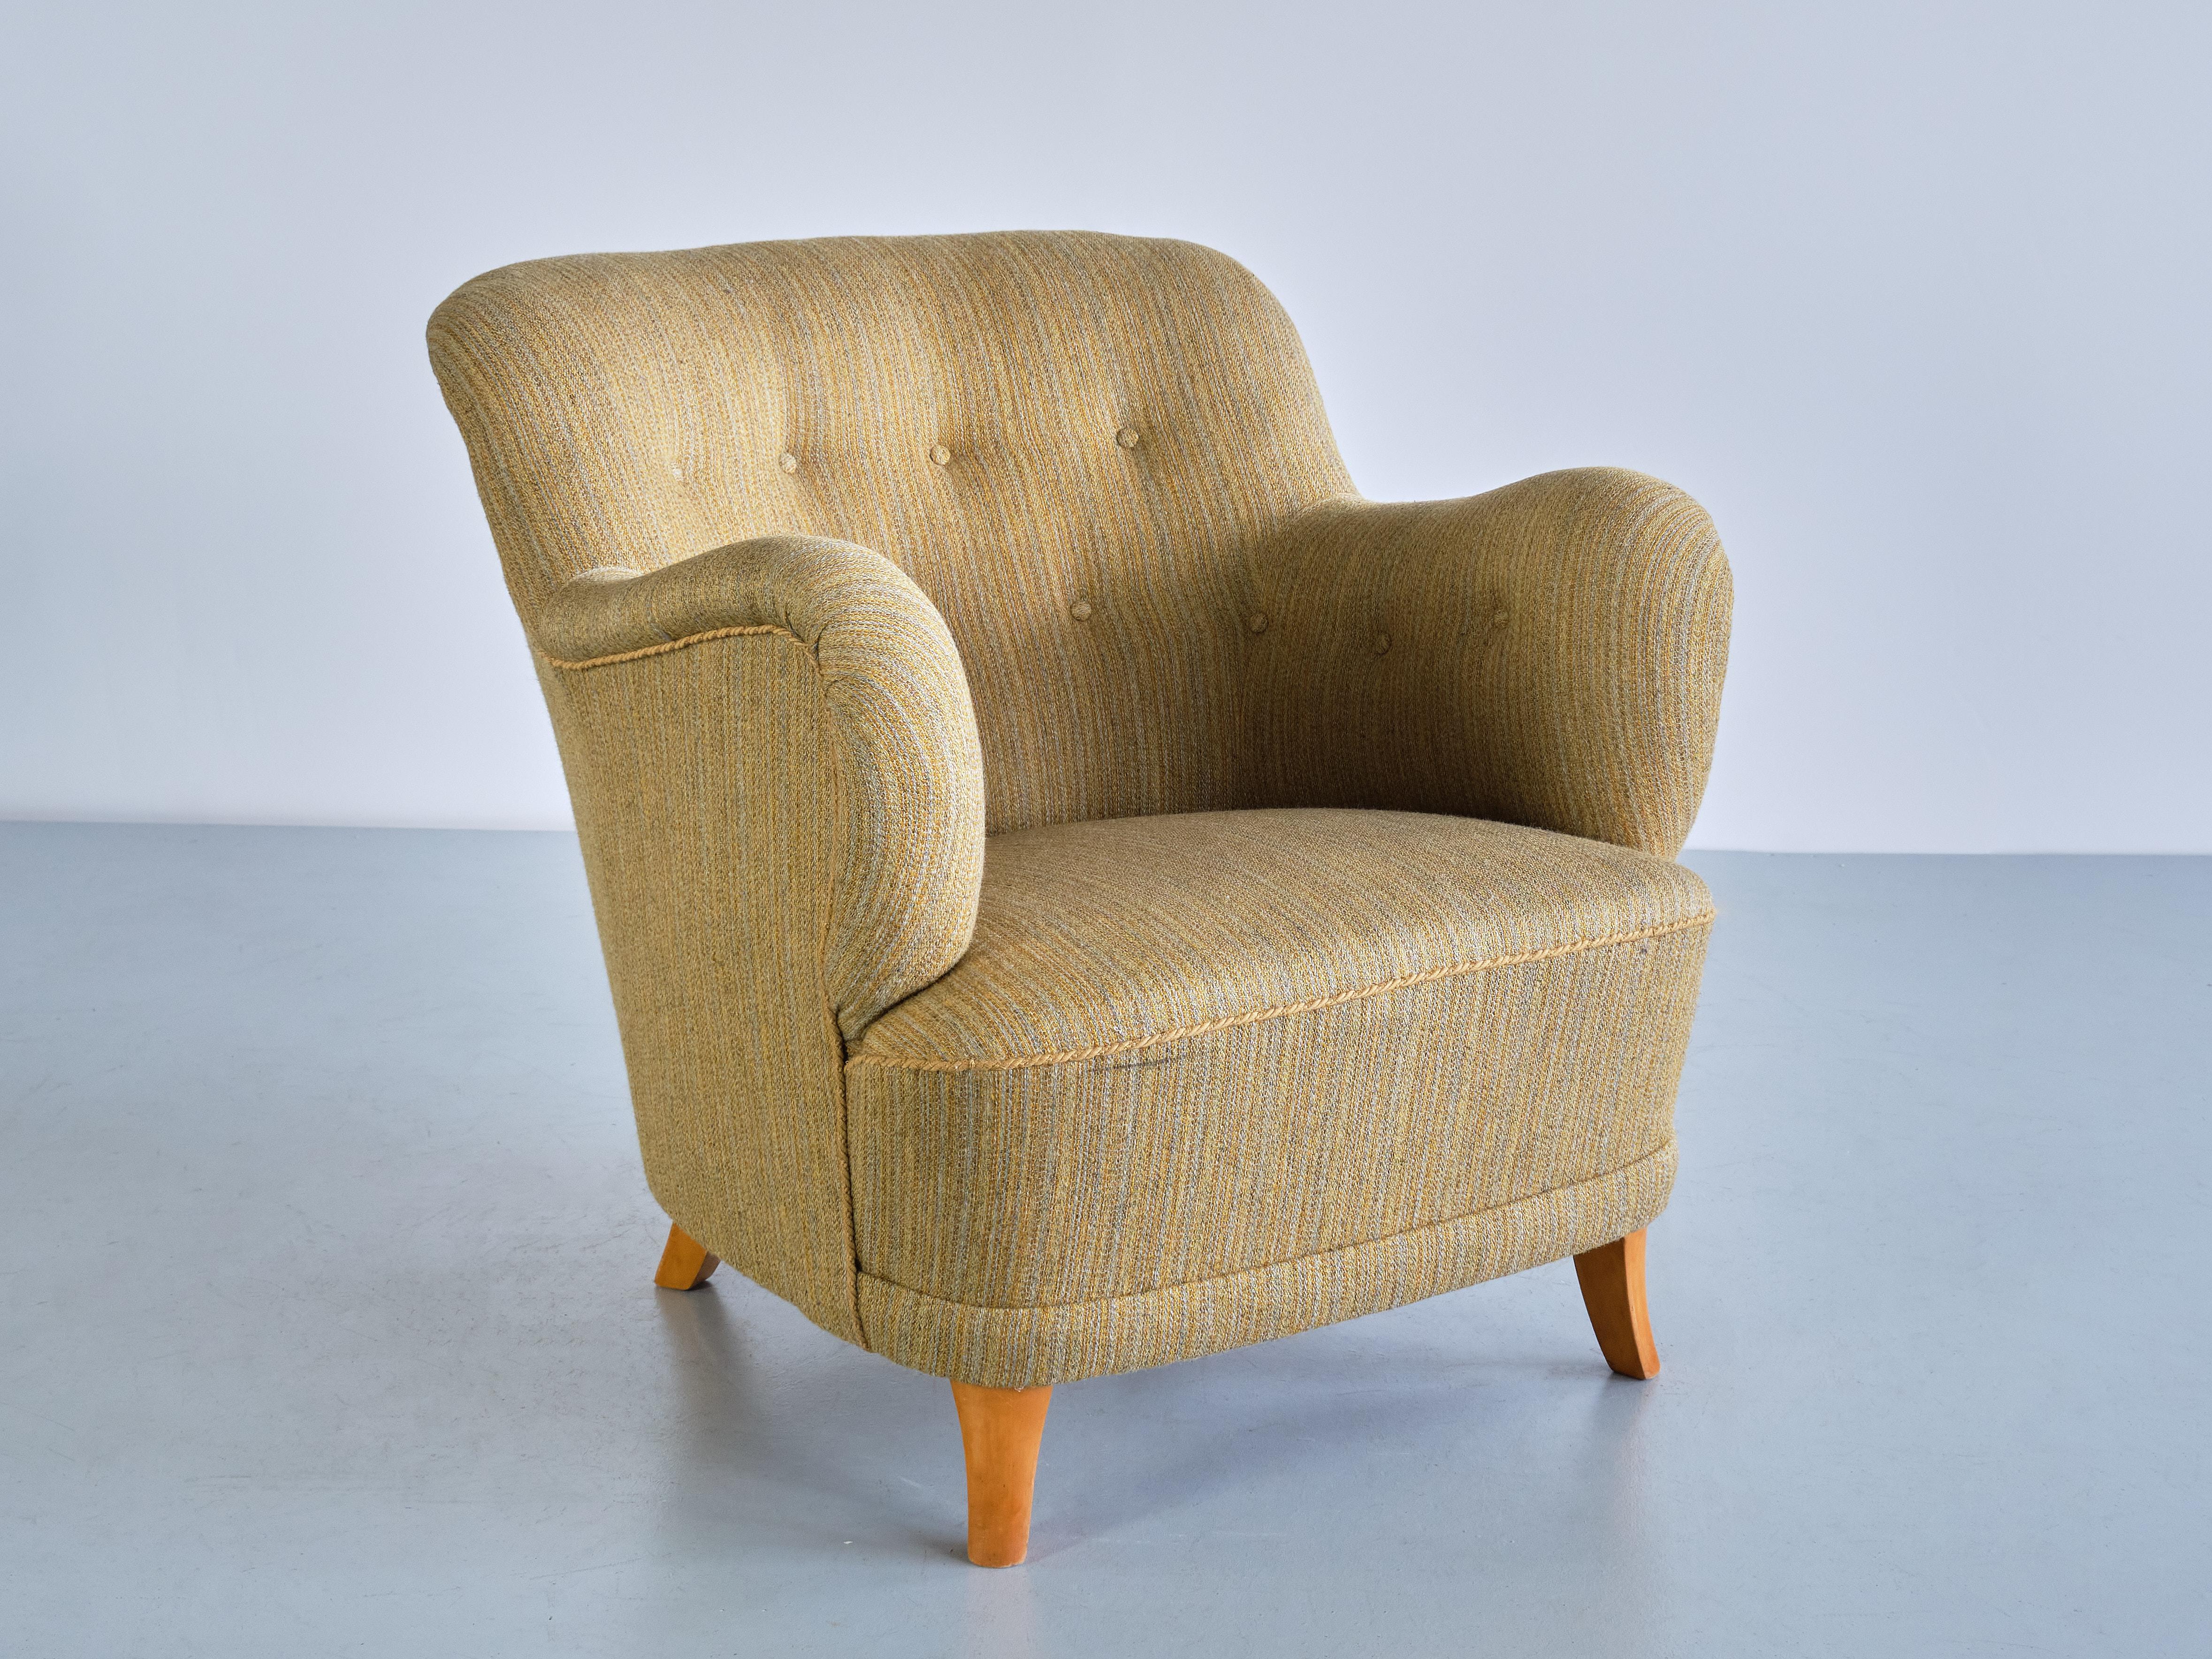 Sculptural Pair of Gustav Axel Berg Armchairs in Beech and Wool, Sweden, 1940s In Good Condition For Sale In The Hague, NL